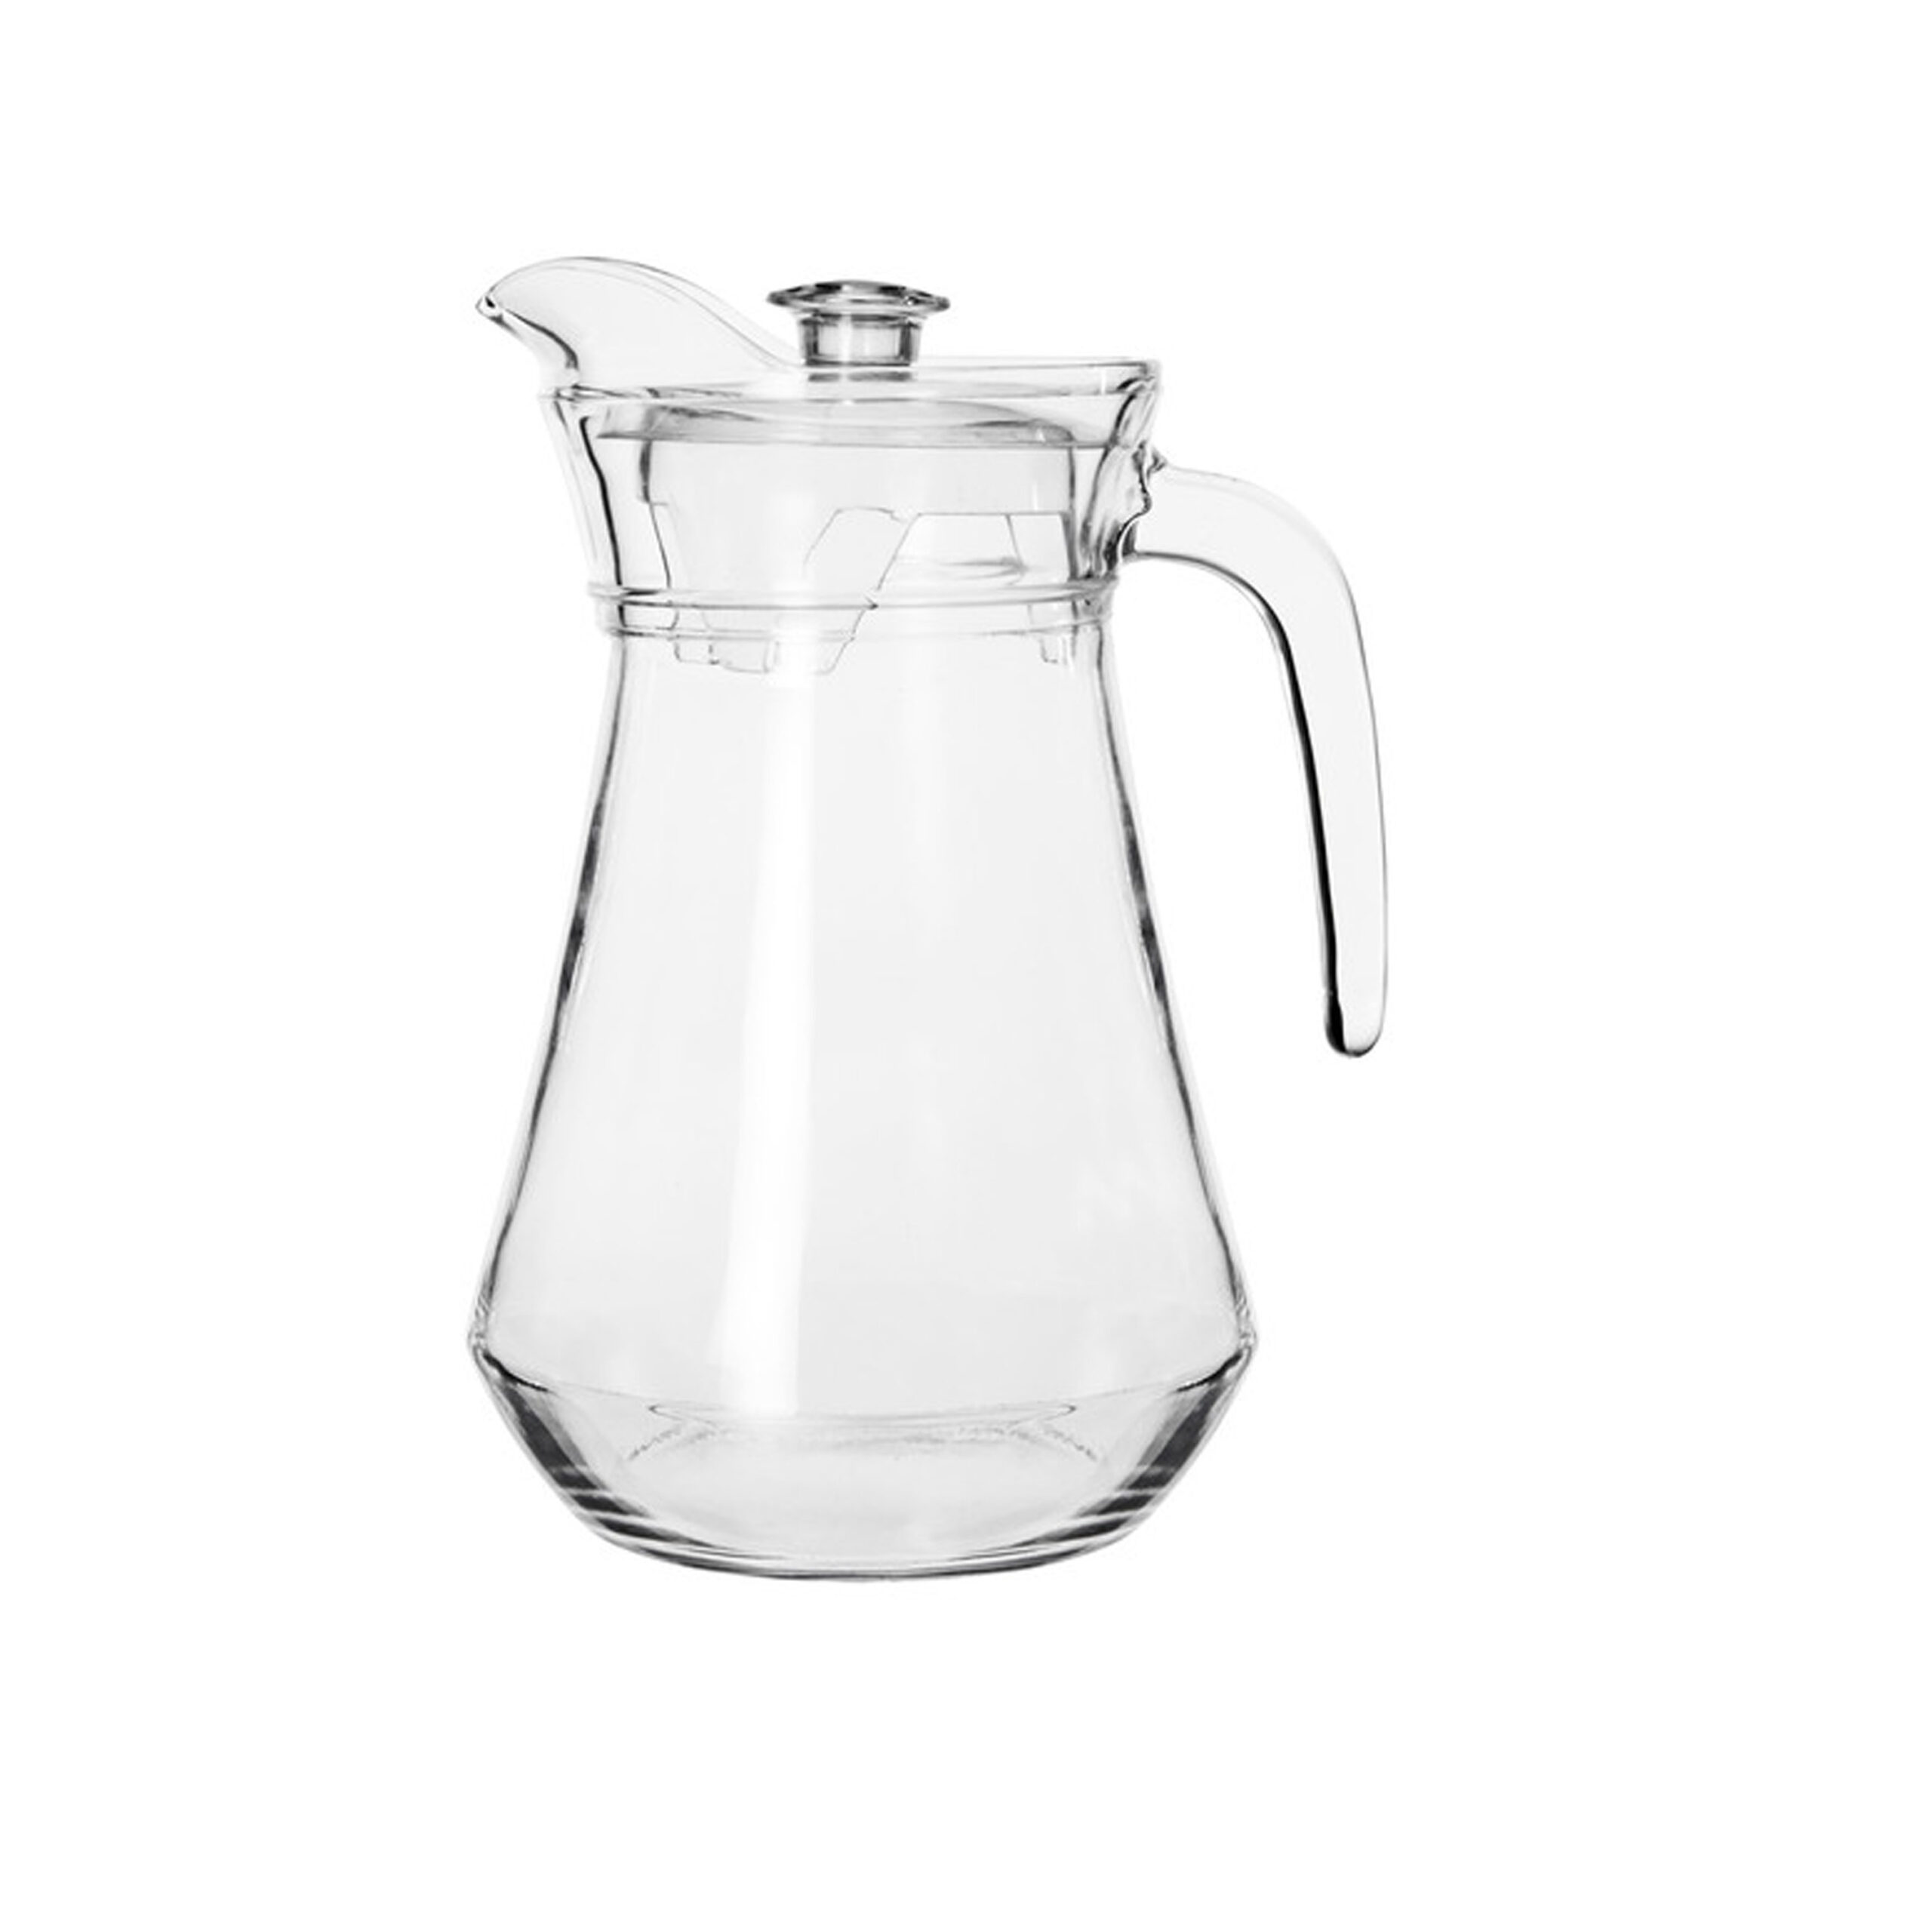 CATERING JUG
WITH LID GLASS
1.3lt